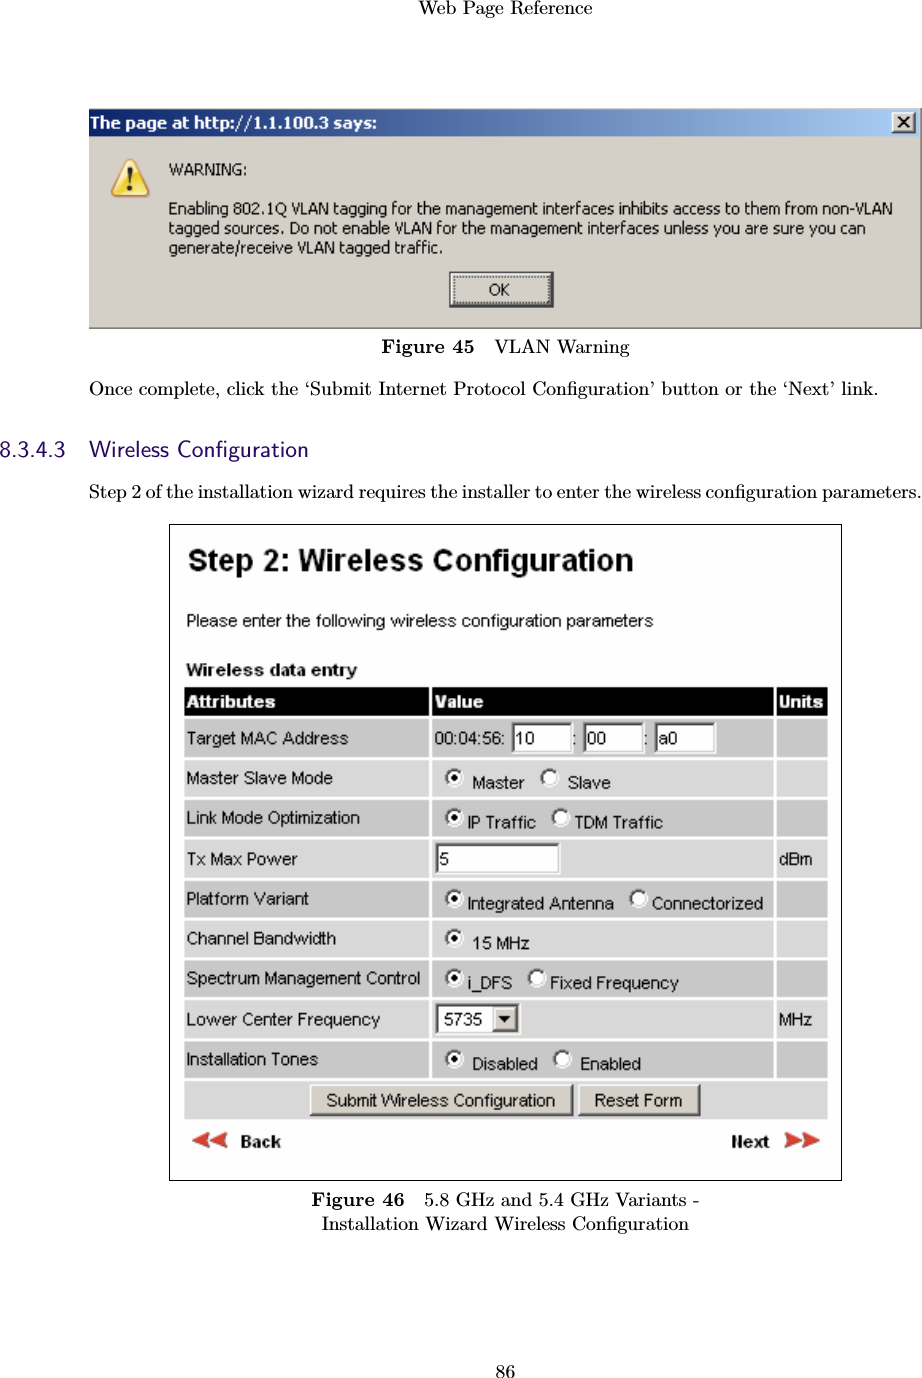 Web Page Reference86Figure 45 VLAN WarningOnce complete, click the ‘Submit Internet Protocol Conﬁguration’ button or the ‘Next’ link.8.3.4.3 Wireless ConﬁgurationStep 2 of the installation wizard requires the installer to enter the wireless conﬁguration parameters.Figure 46 5.8 GHz and 5.4 GHz Variants -Installation Wizard Wireless Conﬁguration